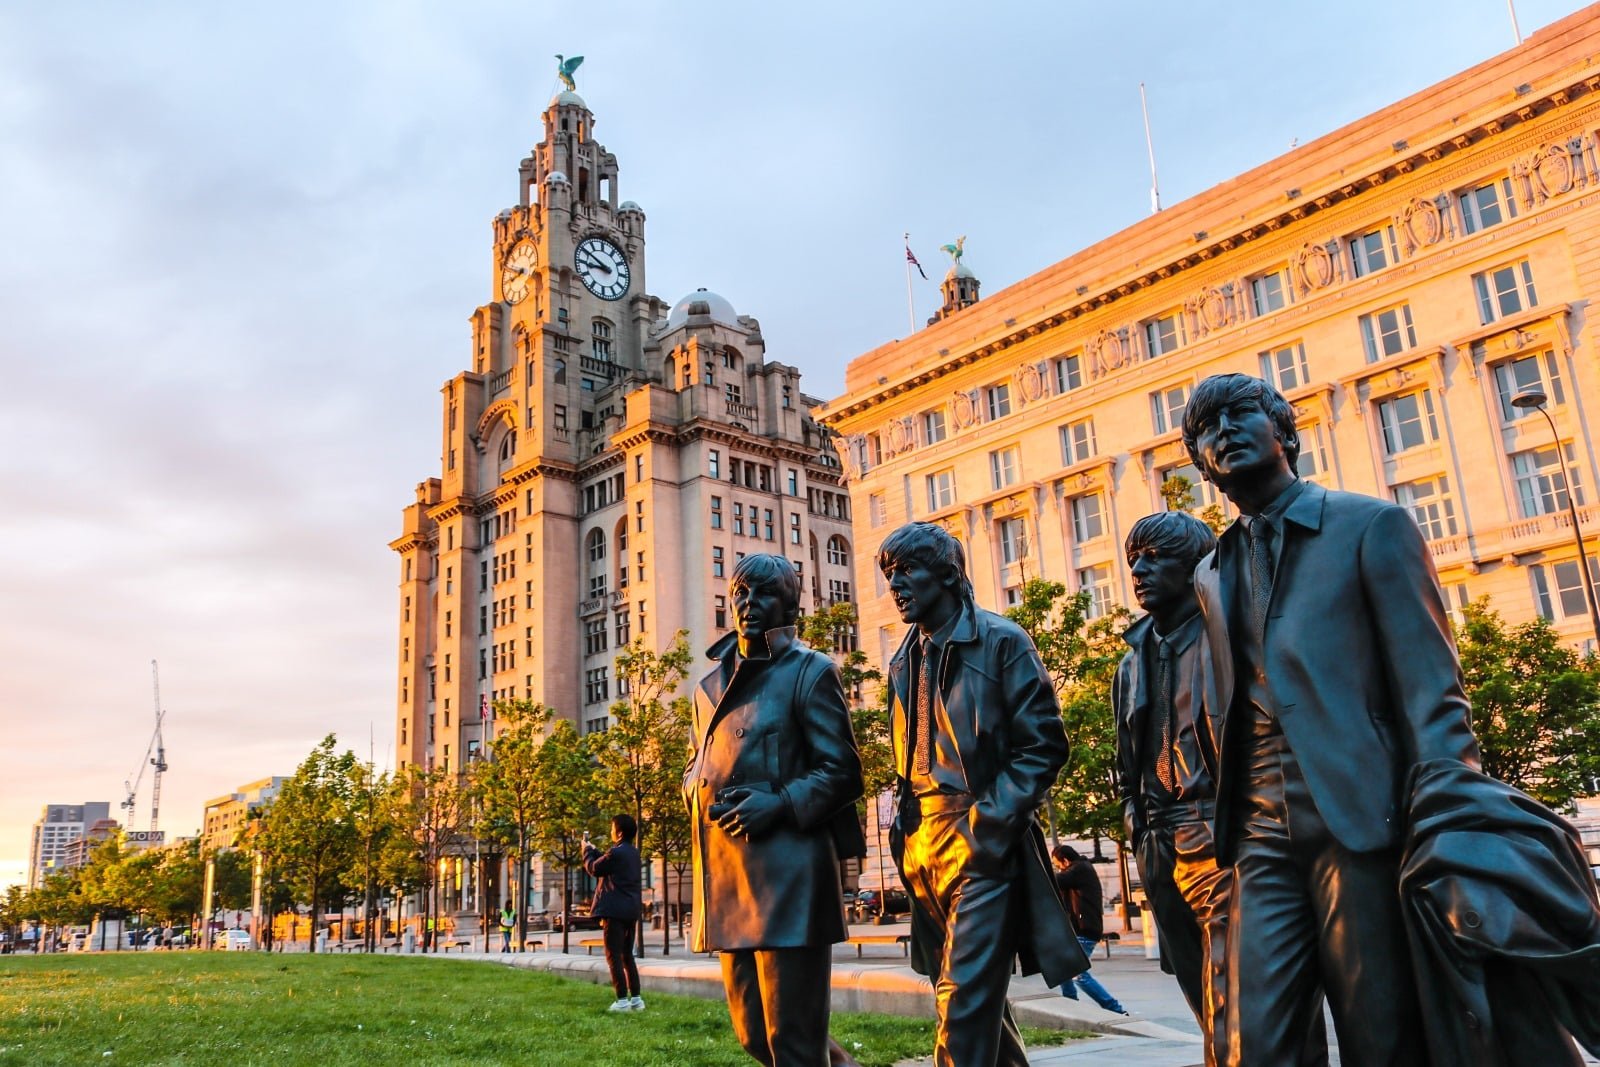 <p><span>In Liverpool, maritime heritage and musical legacy coalesce to create a city with a unique character. This city was The Beatles’ birthplace and demonstrated the transformative power of culture and arts. The Beatles Story exhibition and the legendary Cavern Club are pilgrimage sites for music lovers.</span></p> <p><span>Liverpool’s waterfront, a UNESCO World Heritage Site, narrates the city’s rich maritime history, while contemporary museums like Tate Liverpool and the Museum of Liverpool showcase its ongoing cultural evolution. Liverpool is a city that embraces its past and looks forward with a dynamic, fun and creative spirit.</span></p>